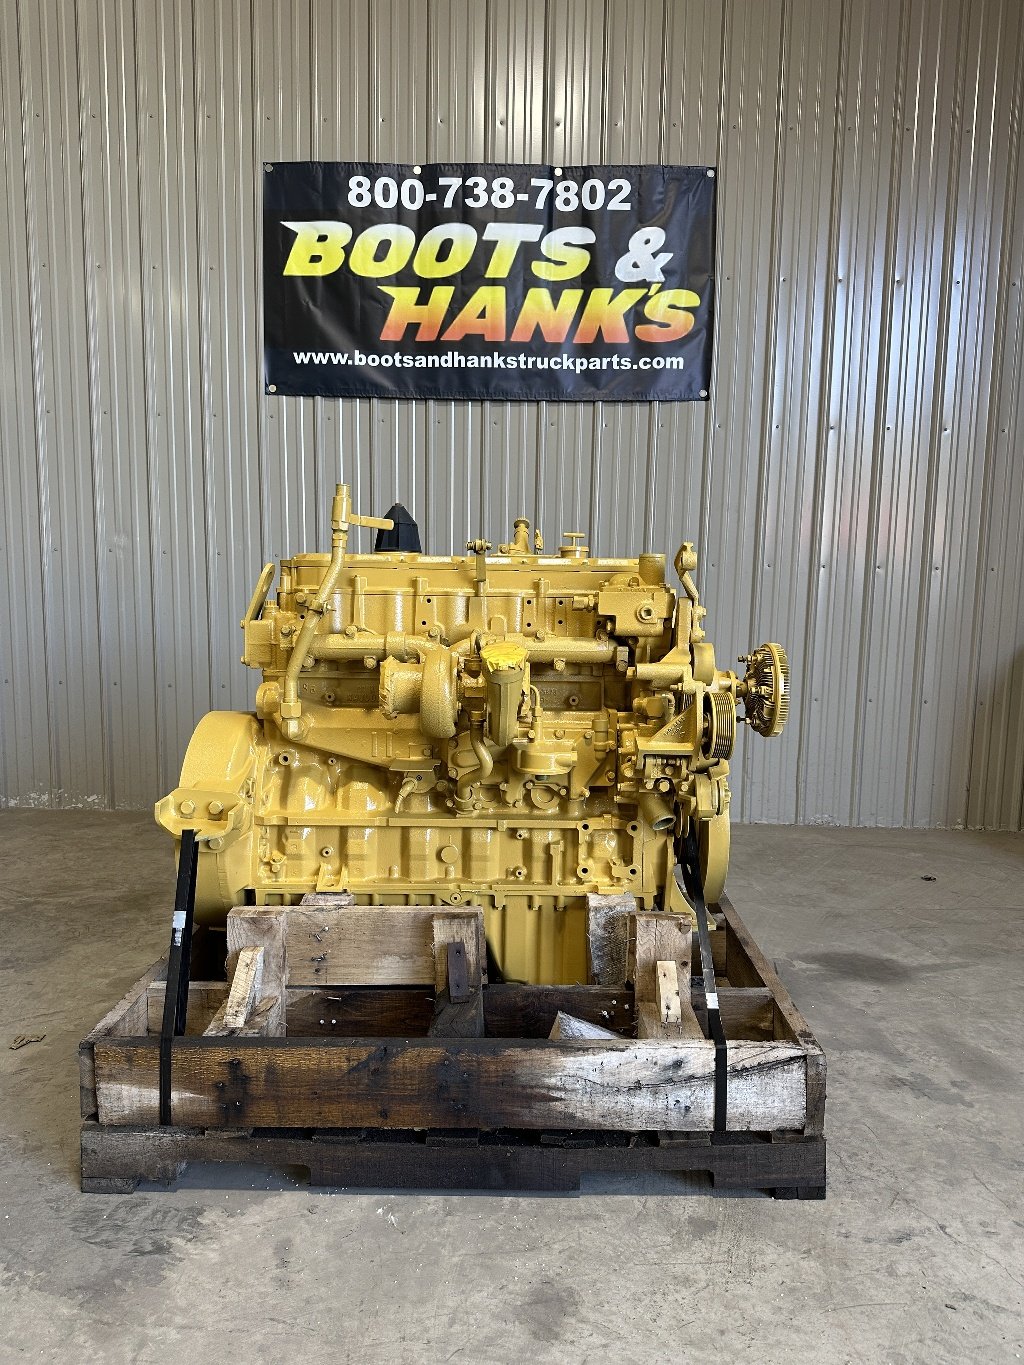 USED 1999 CAT 3126 COMPLETE ENGINE TRUCK PARTS #1983